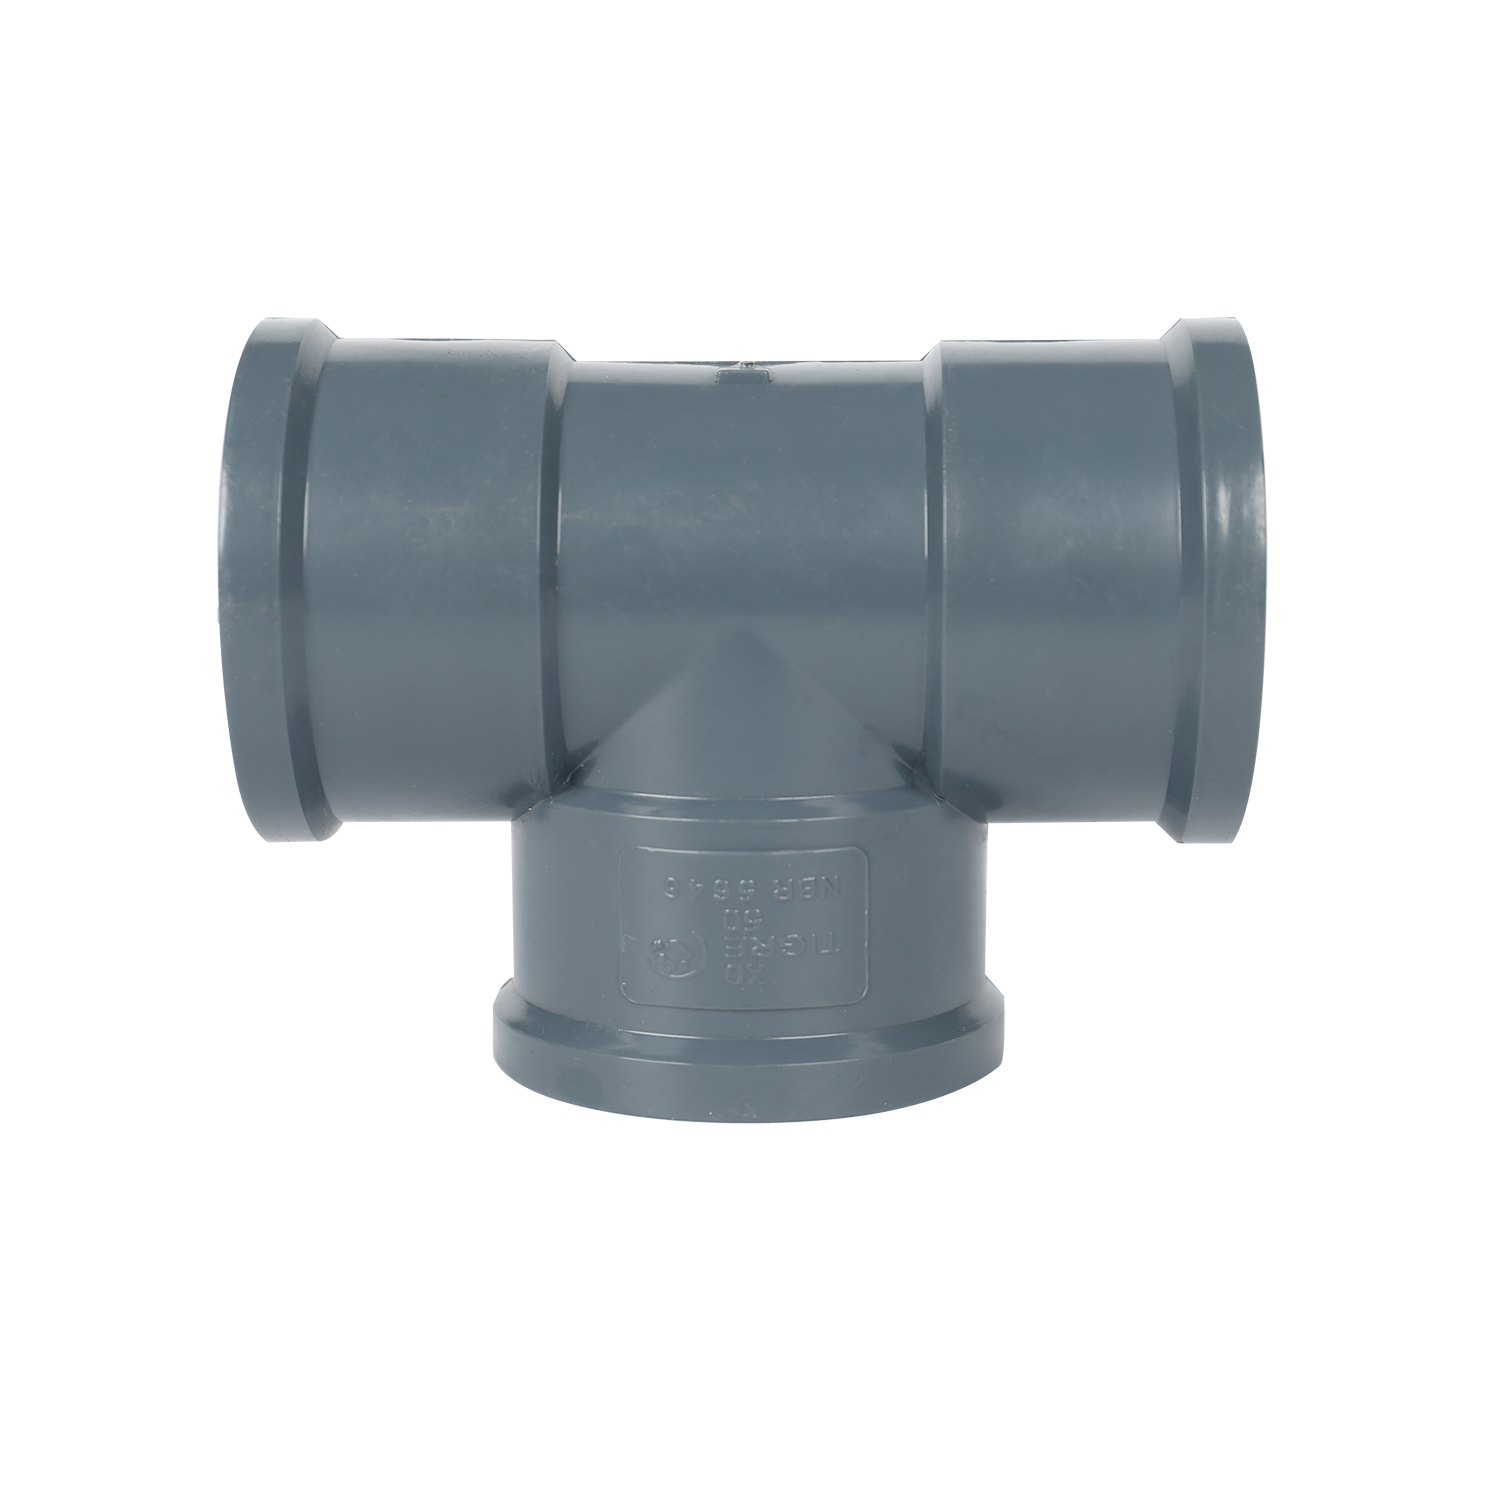 Factory wholesale high quality plastic pvc pipe plumbing fittings manufacturers 3 inch PVC tee fittings supplier